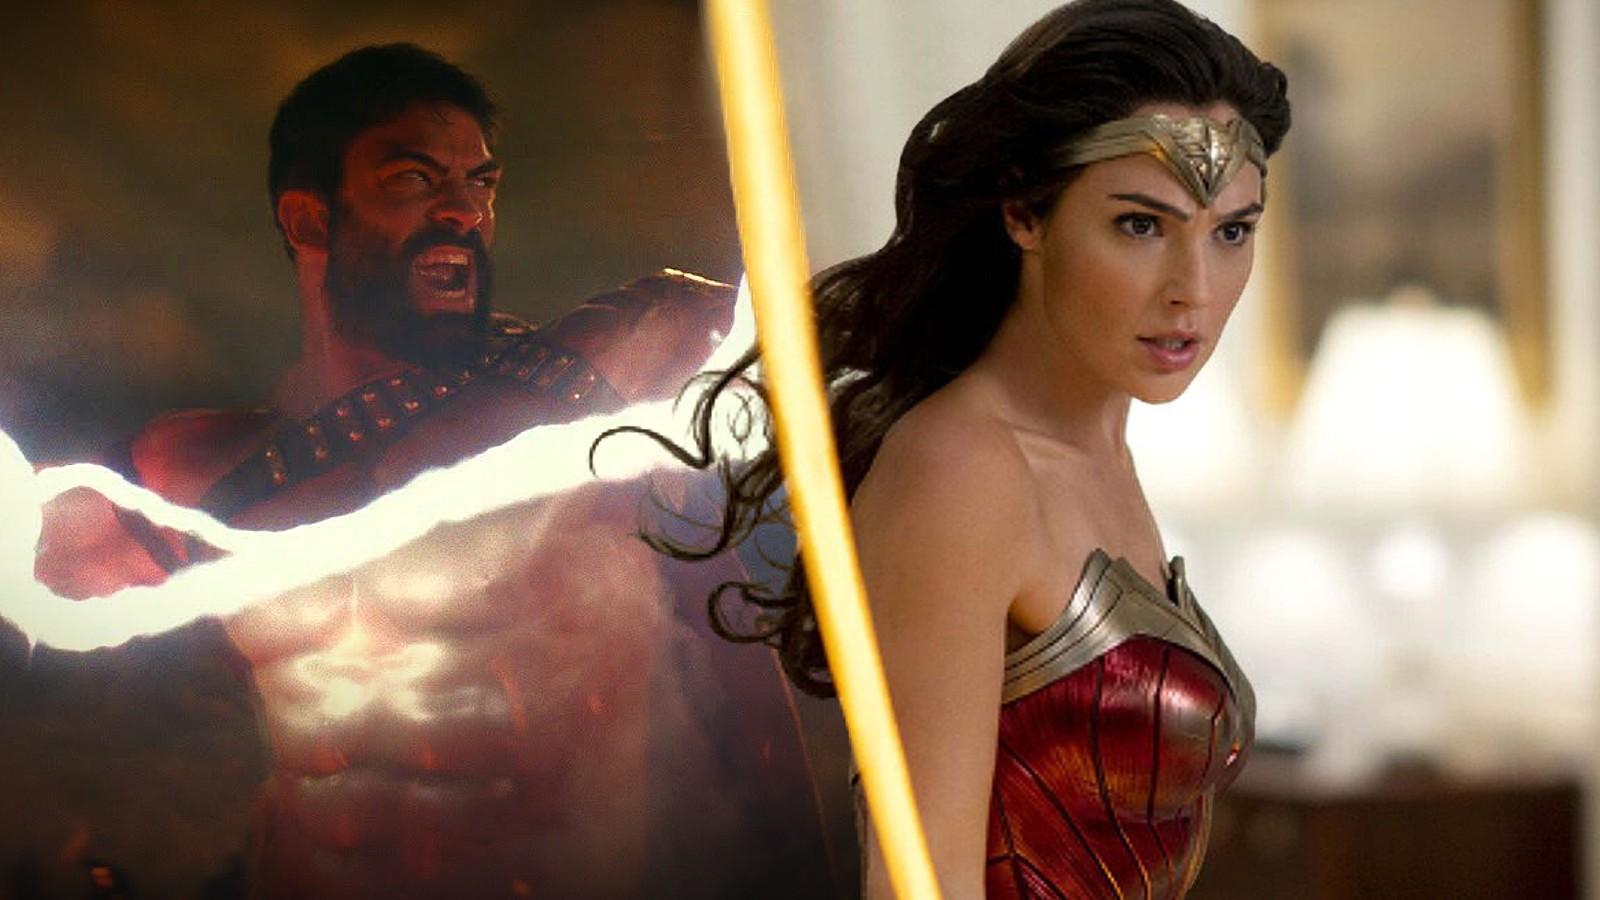 Zeus in Zack Snyder's Justice League and Gal Gadot as Wonder Woman